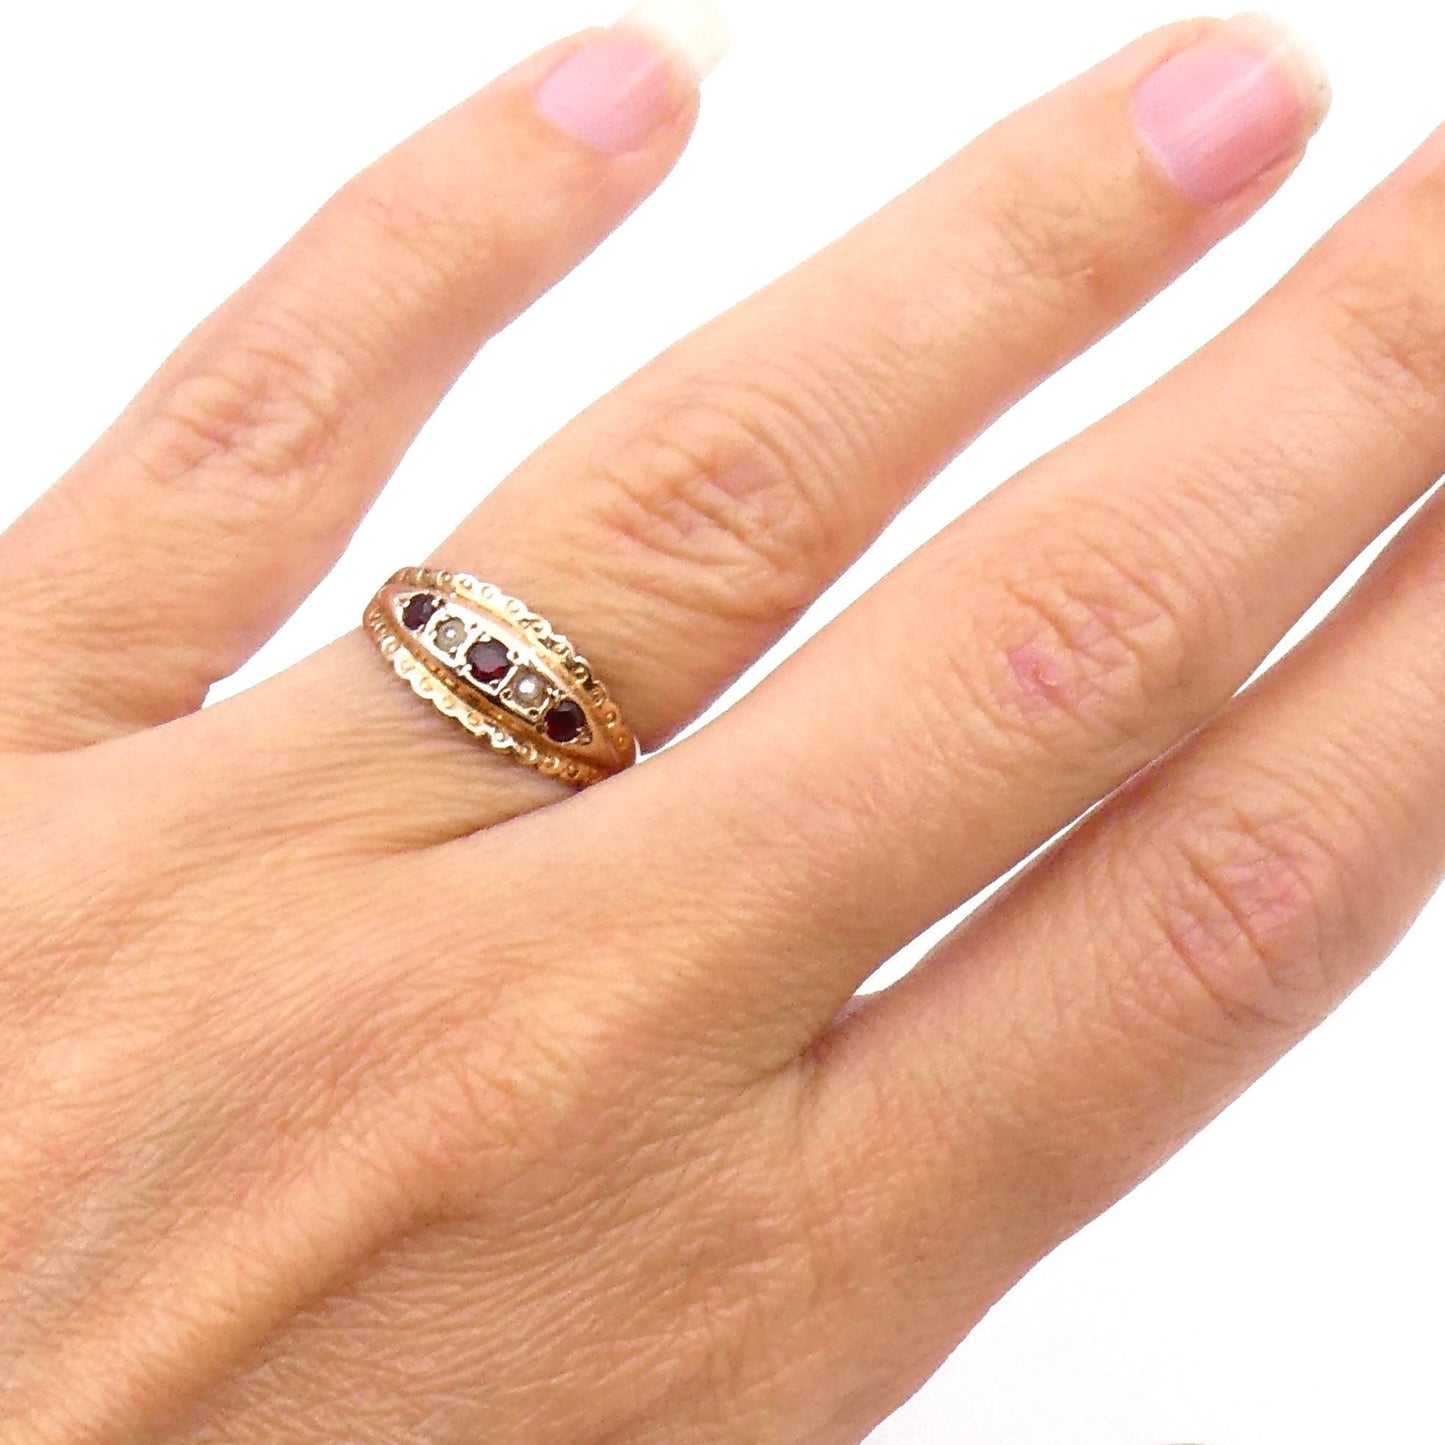 Vintage ring, a garnet pearl gypsy ring in 9kt gold with ornate detailing. - Collected